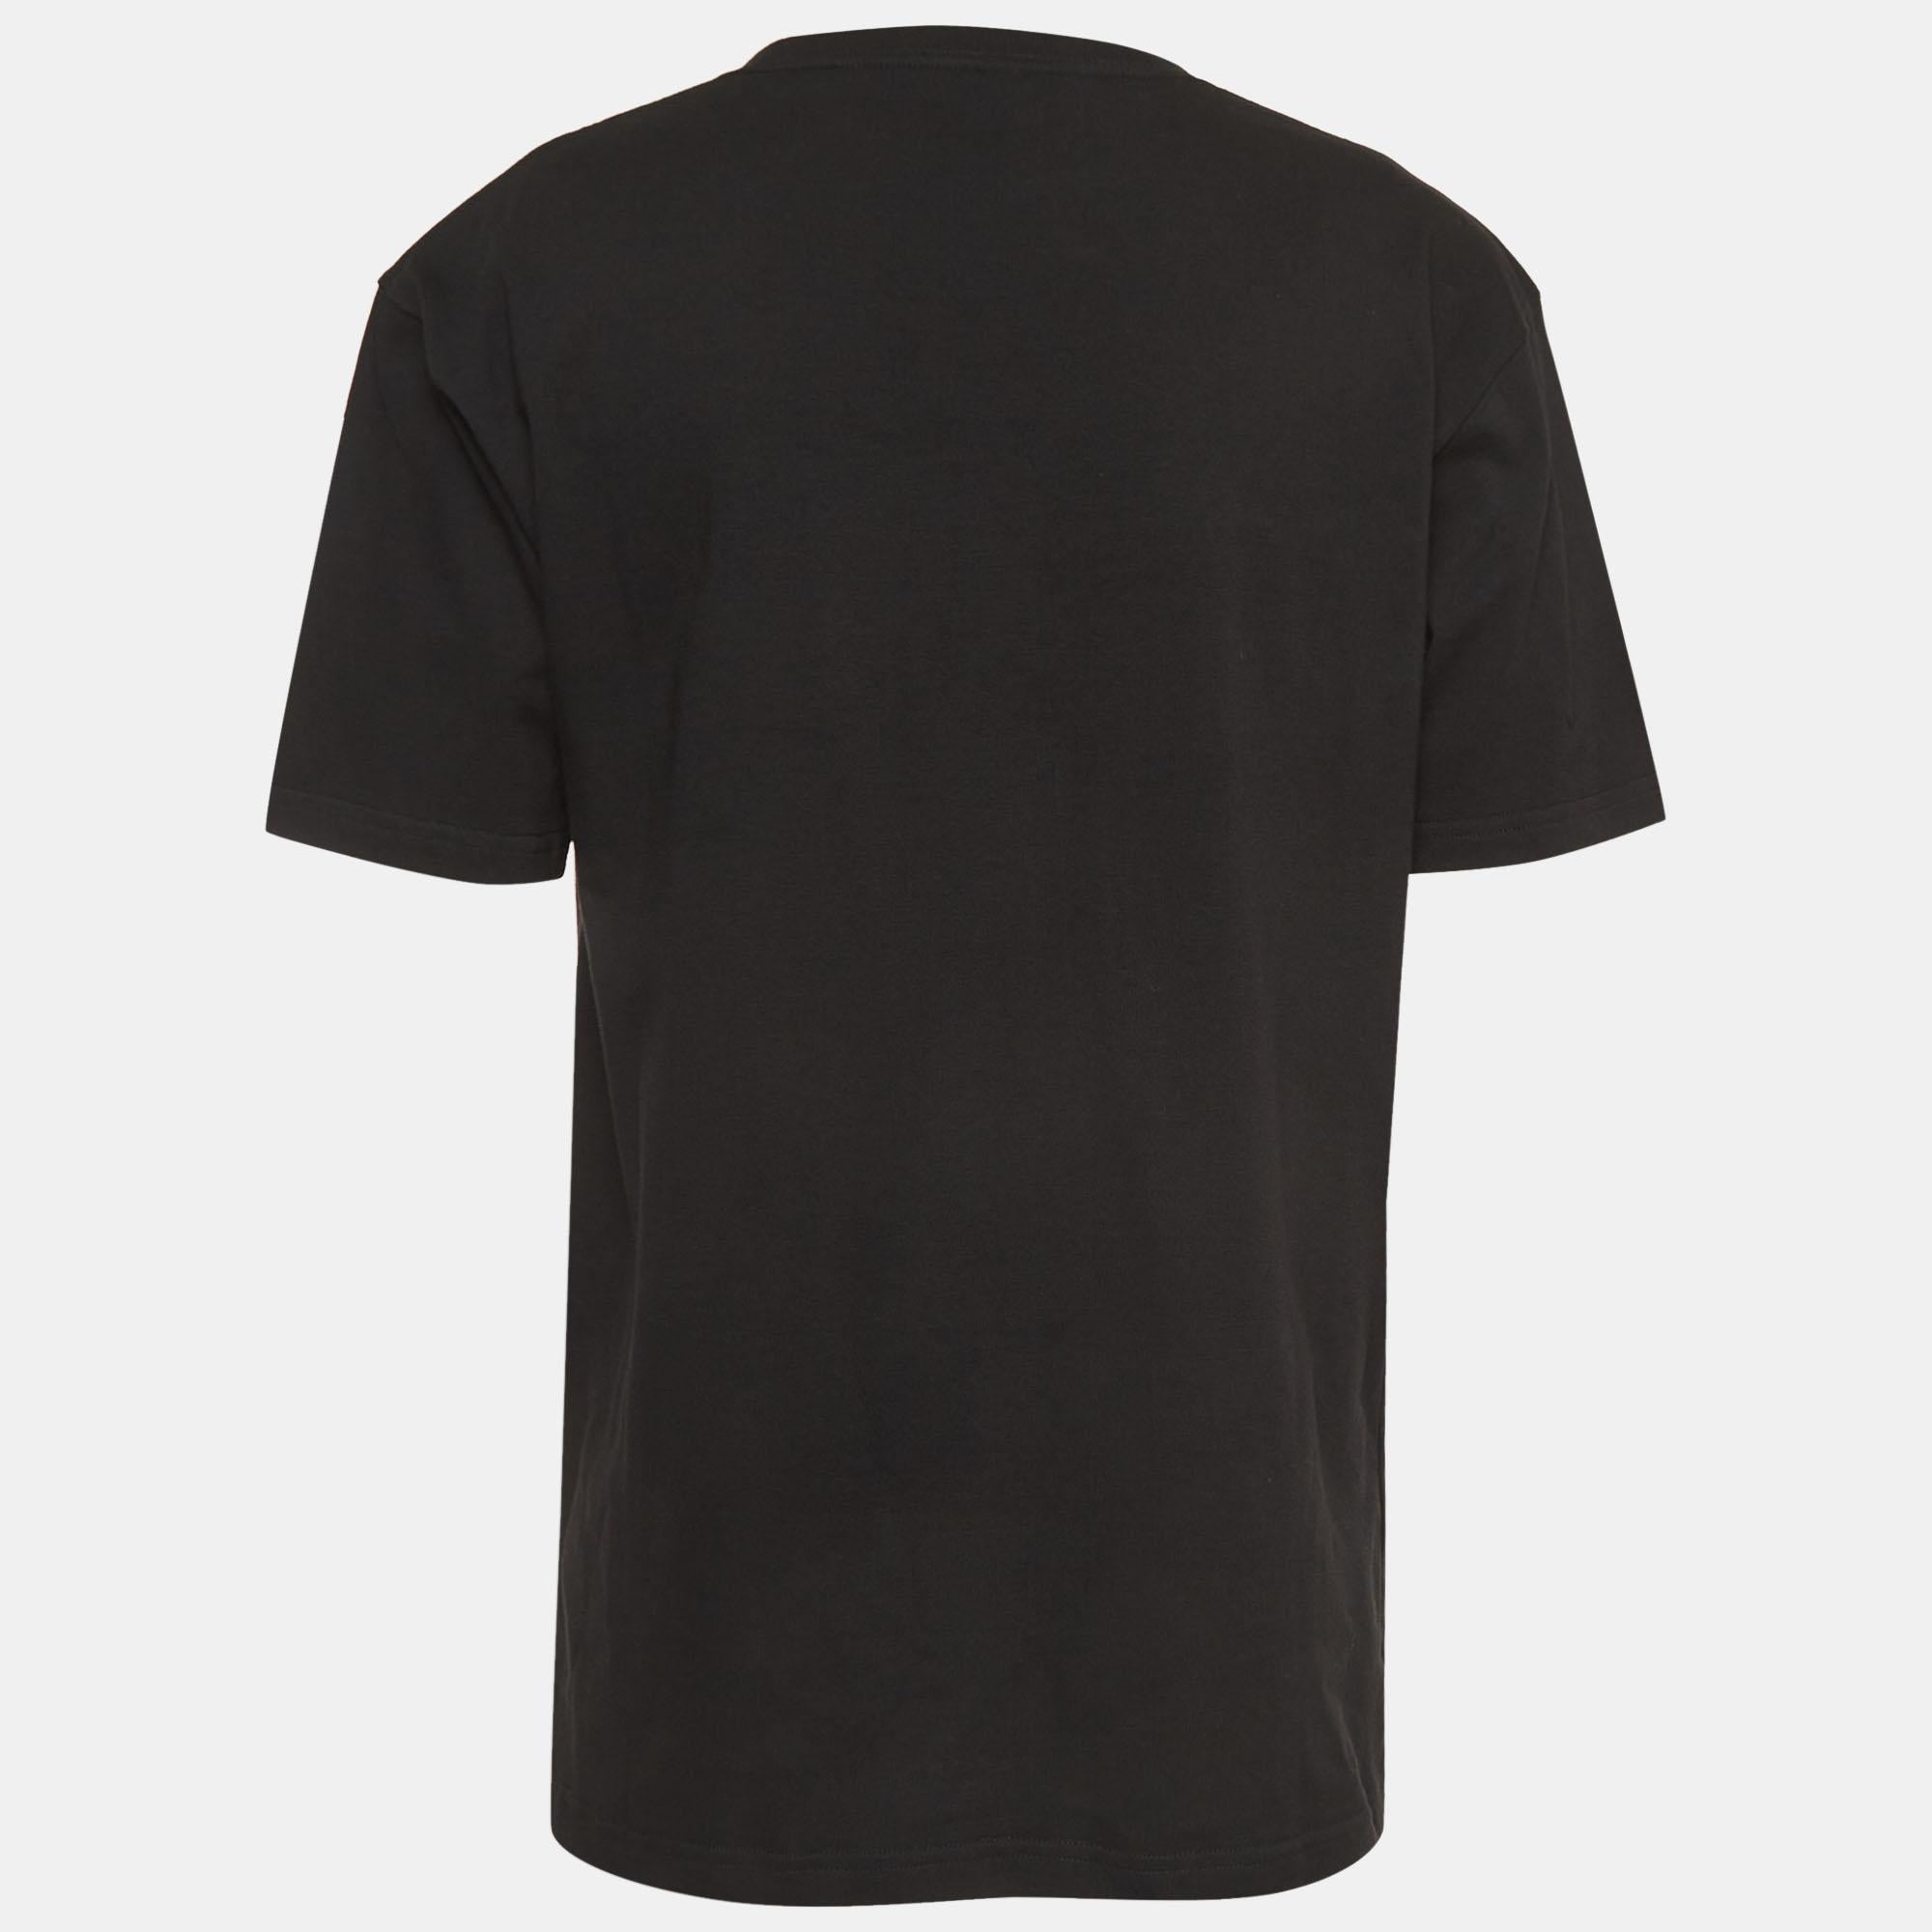 The Dior Homme X Cactus Jack t-shirt combines luxury and streetwear with intricate detailing. Featuring a black cotton base, it showcases collaborative branding, blending Dior's elegance with Cactus Jack's edgy style, creating a fashionable and